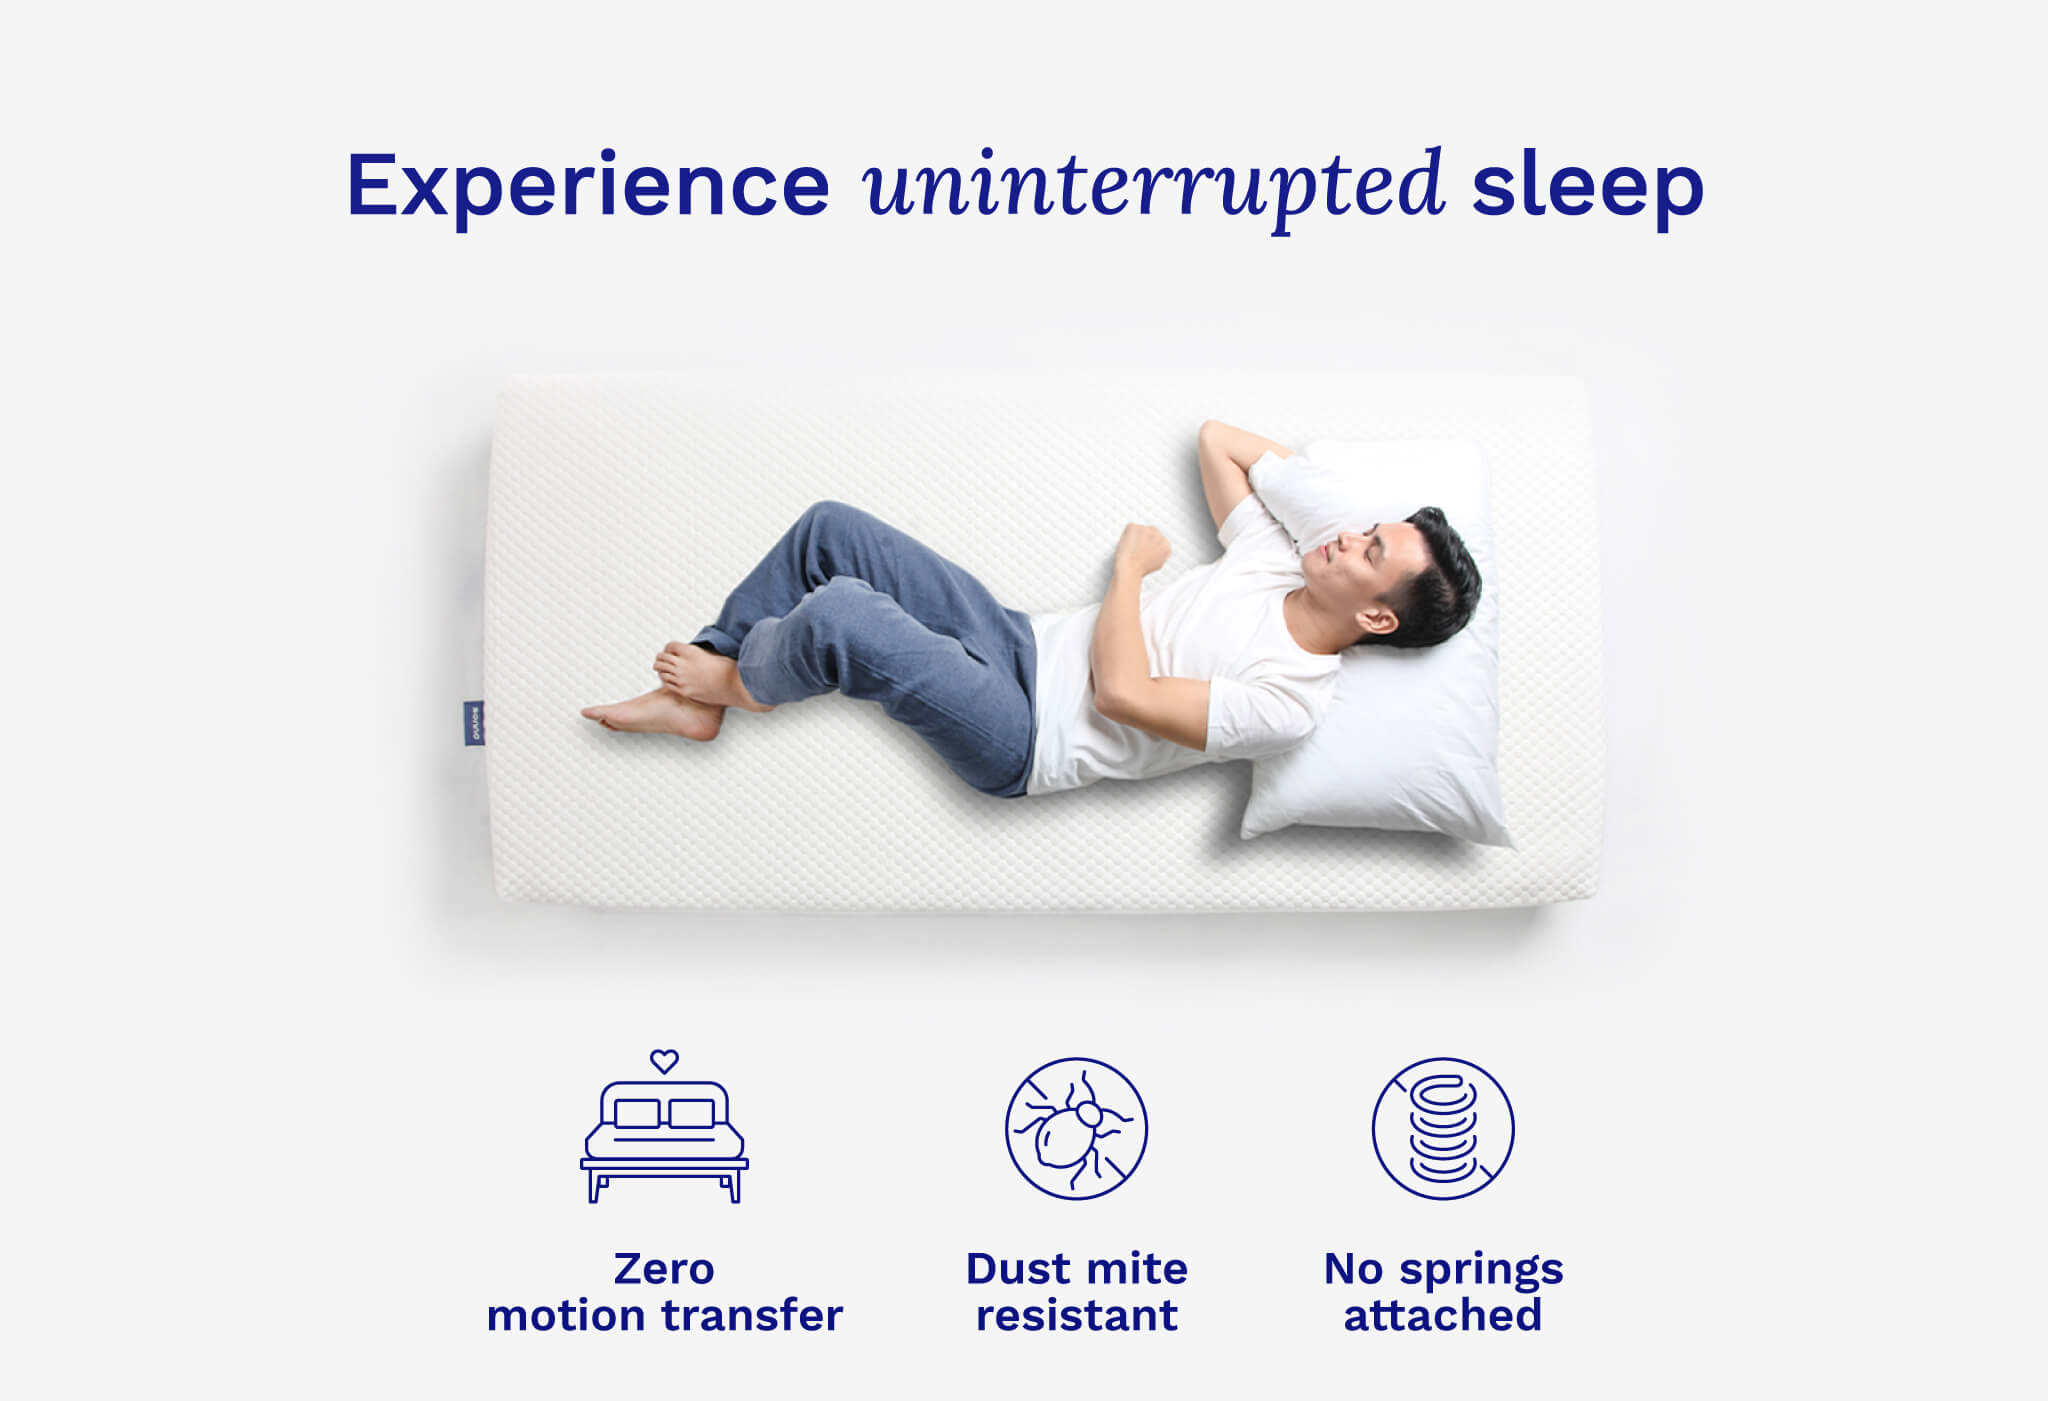 Sonno Original mattress designed to minimize motion transfer, reduce partner disturbance, and resist dust mites for a peaceful sleep.